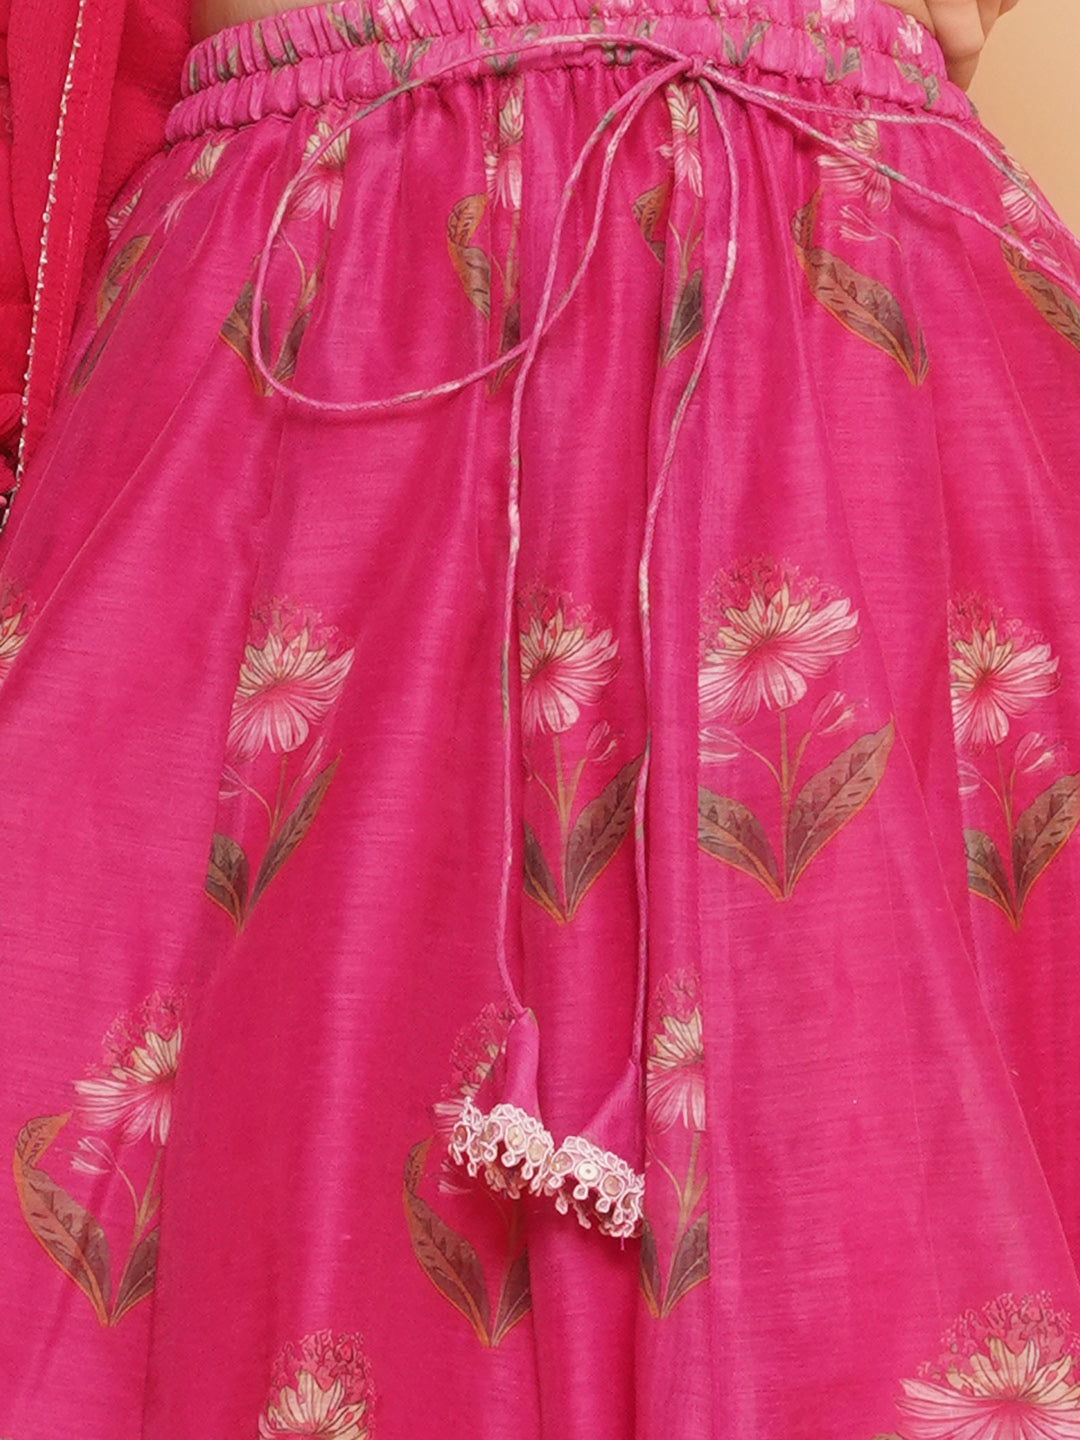 Girls Dark Pink Floral Printed Ready to Wear Lehenga & Blouse With Dupatta